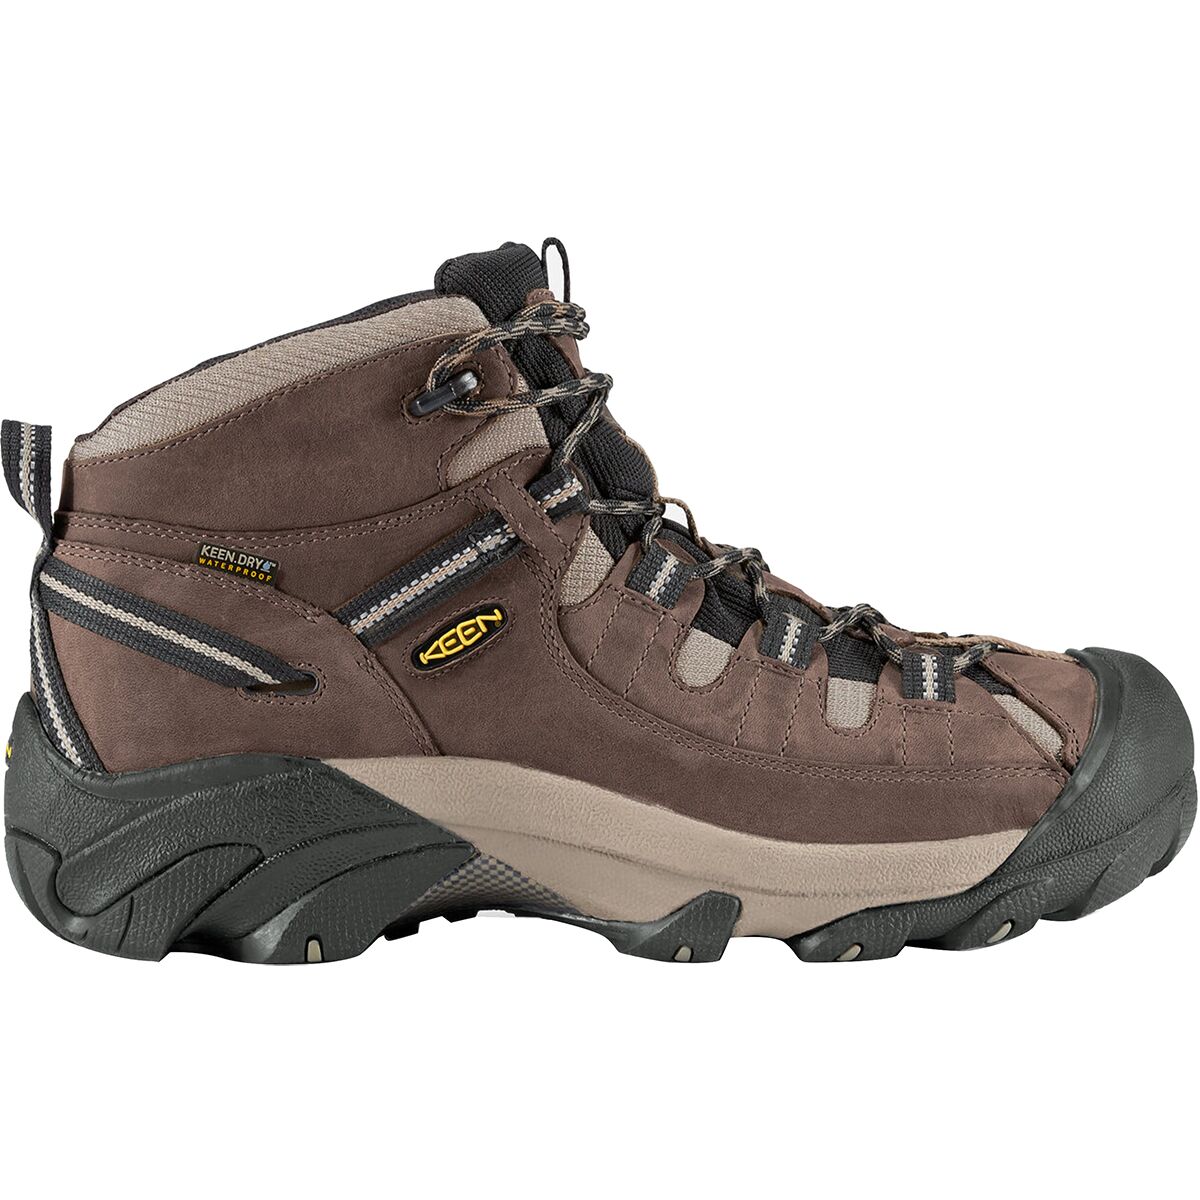 134 95 buy now womens boots  134 95 buy now women s hiking boot  134 ...